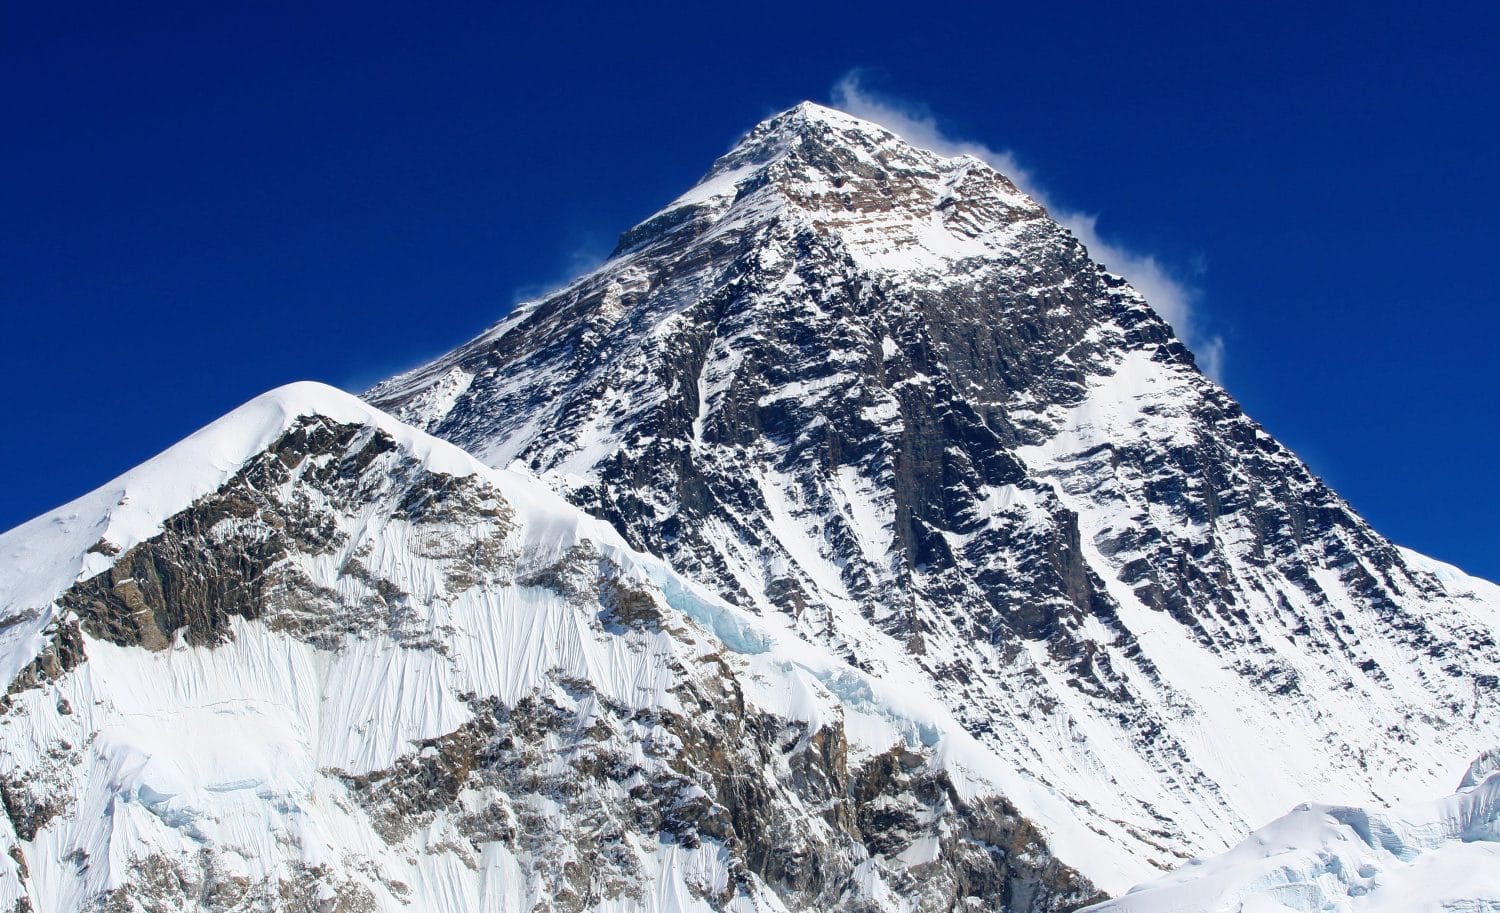 How hard is it to climb Mount Everest. The World's Highest Mountain.